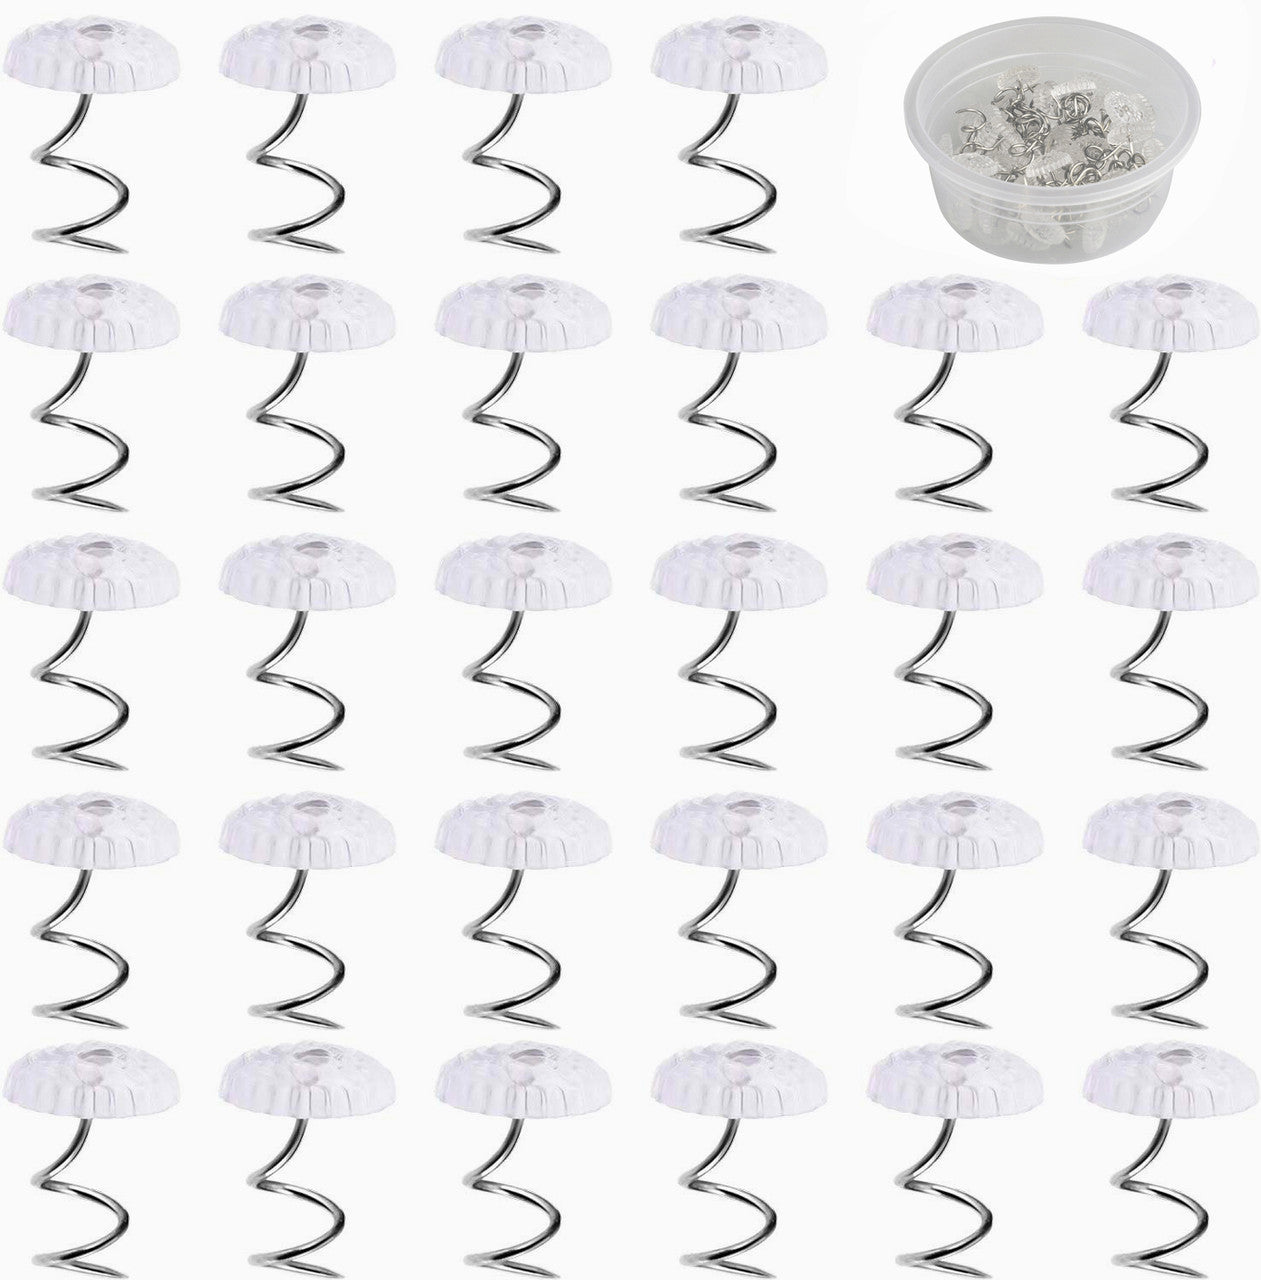 Set of 50, Fabric Twisty Pins with Clear Heads for Upholstery, Bedskirts, Slip Covers, Slipcovers and Other Materials - Sewing Supplies Essential